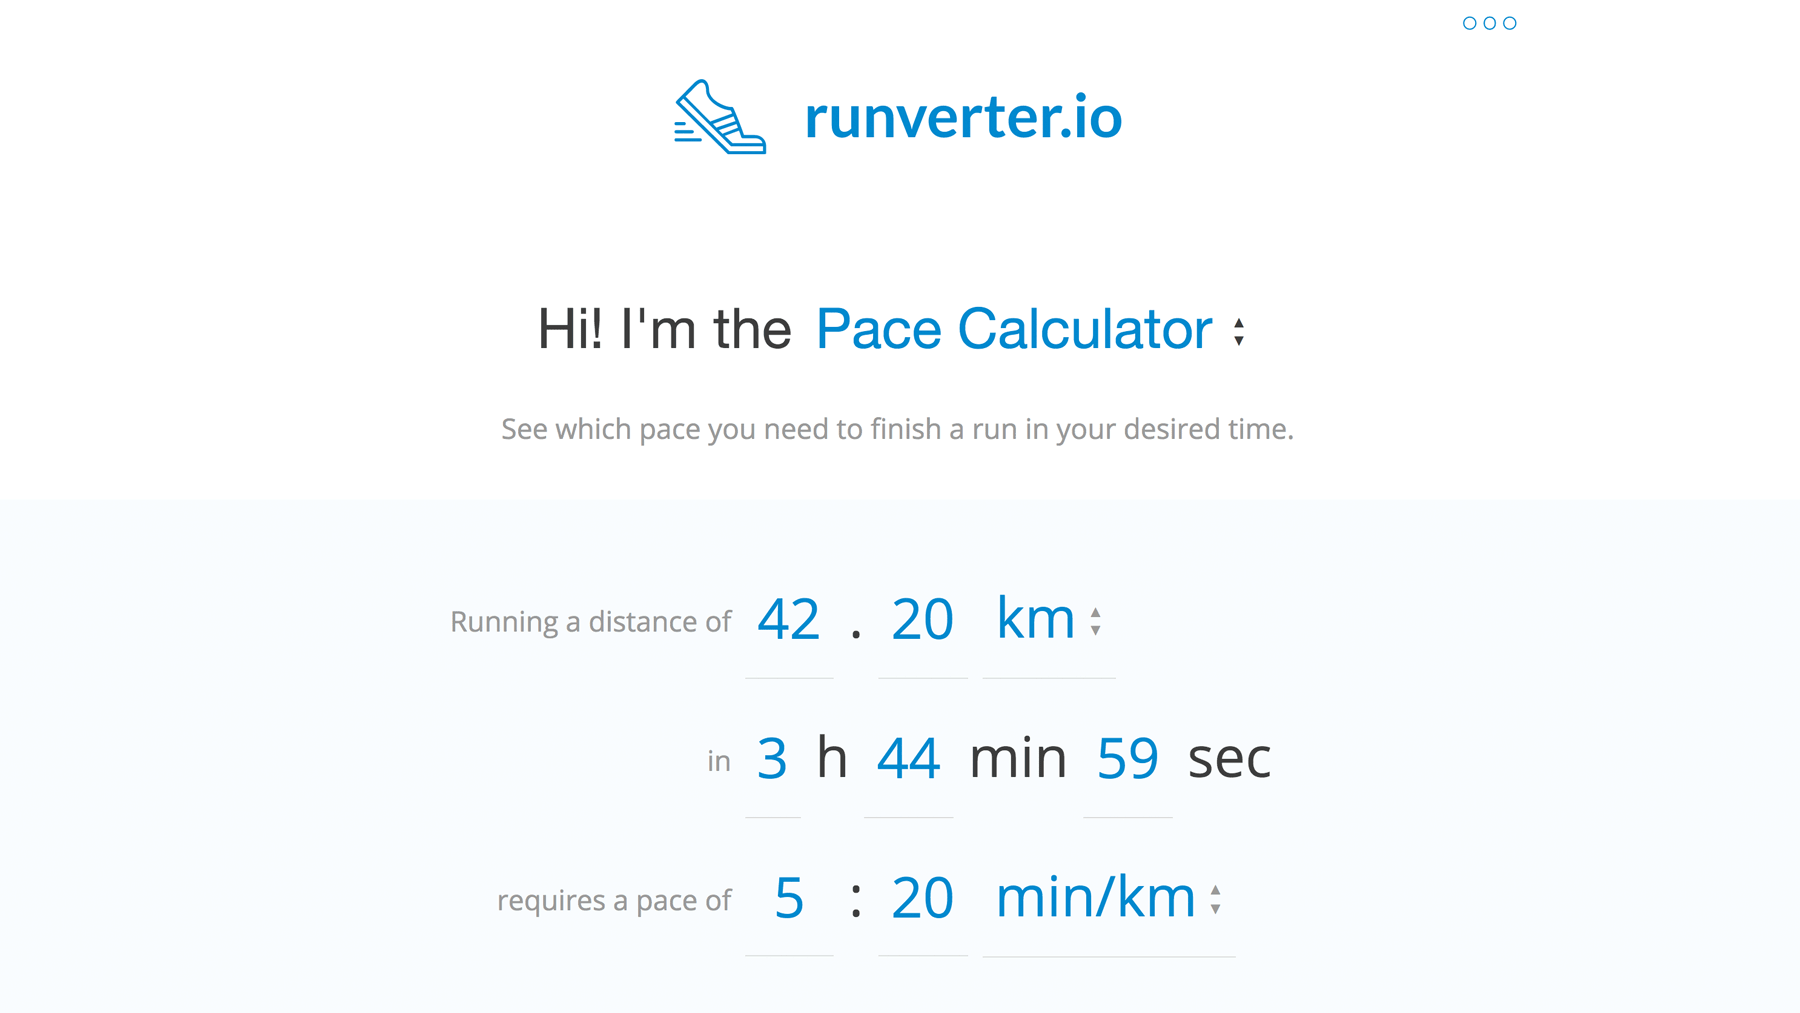 A browser screenshot of the running calculator runverter.io displaying light and darkmode in comparison